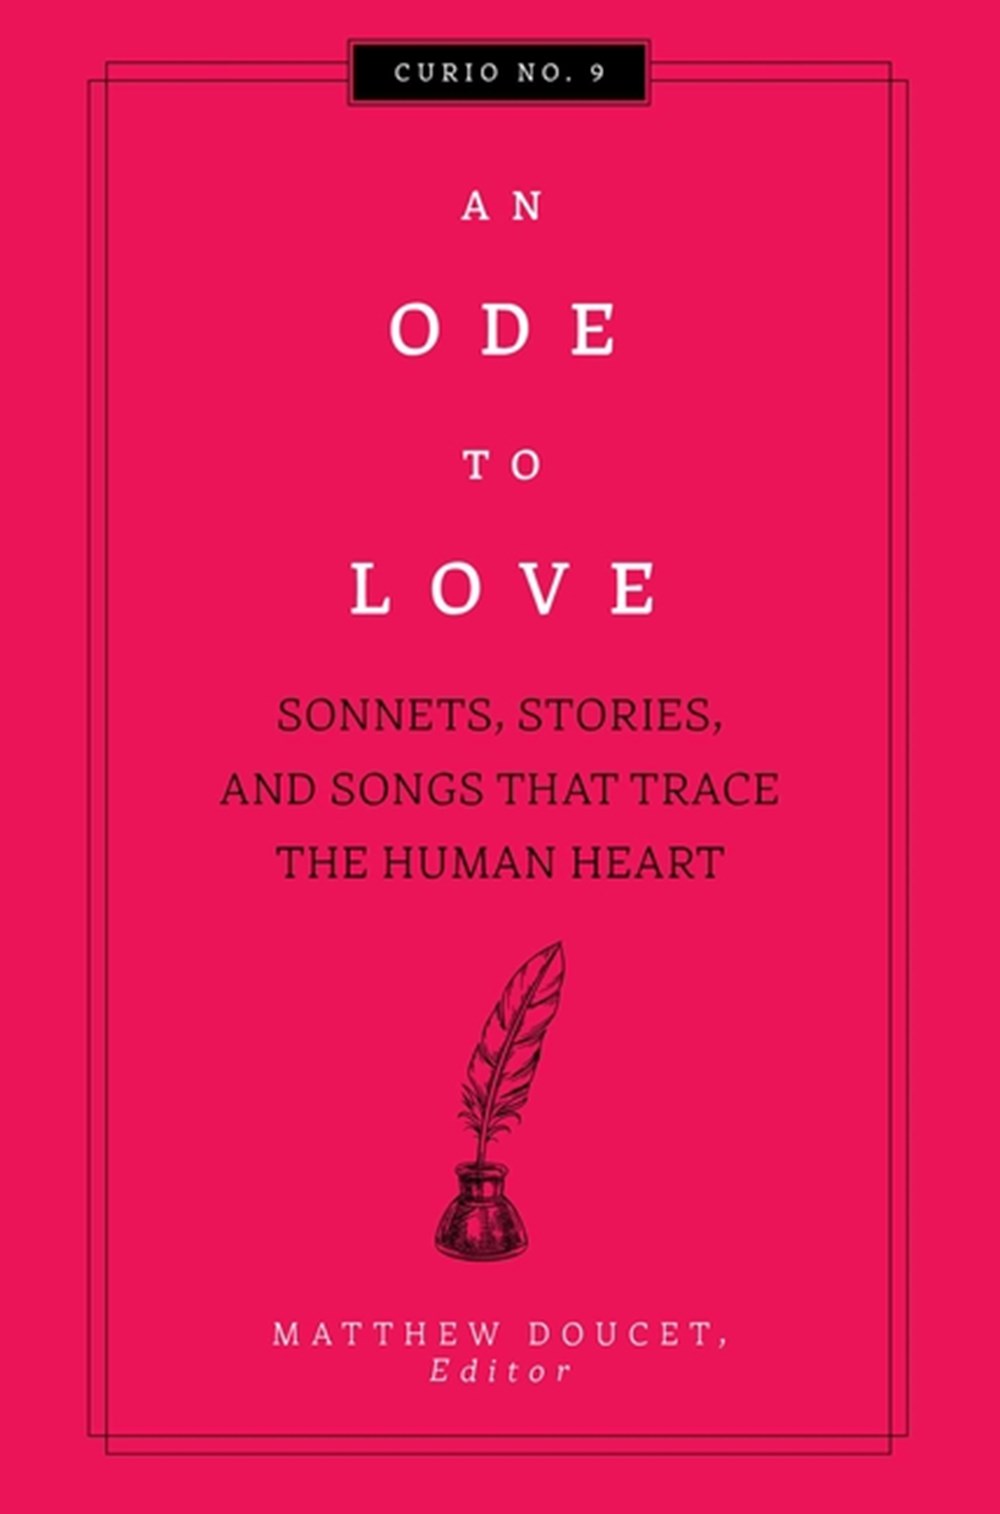 Ode to Love: Sonnets, Stories, and Songs That Trace the Human Heart